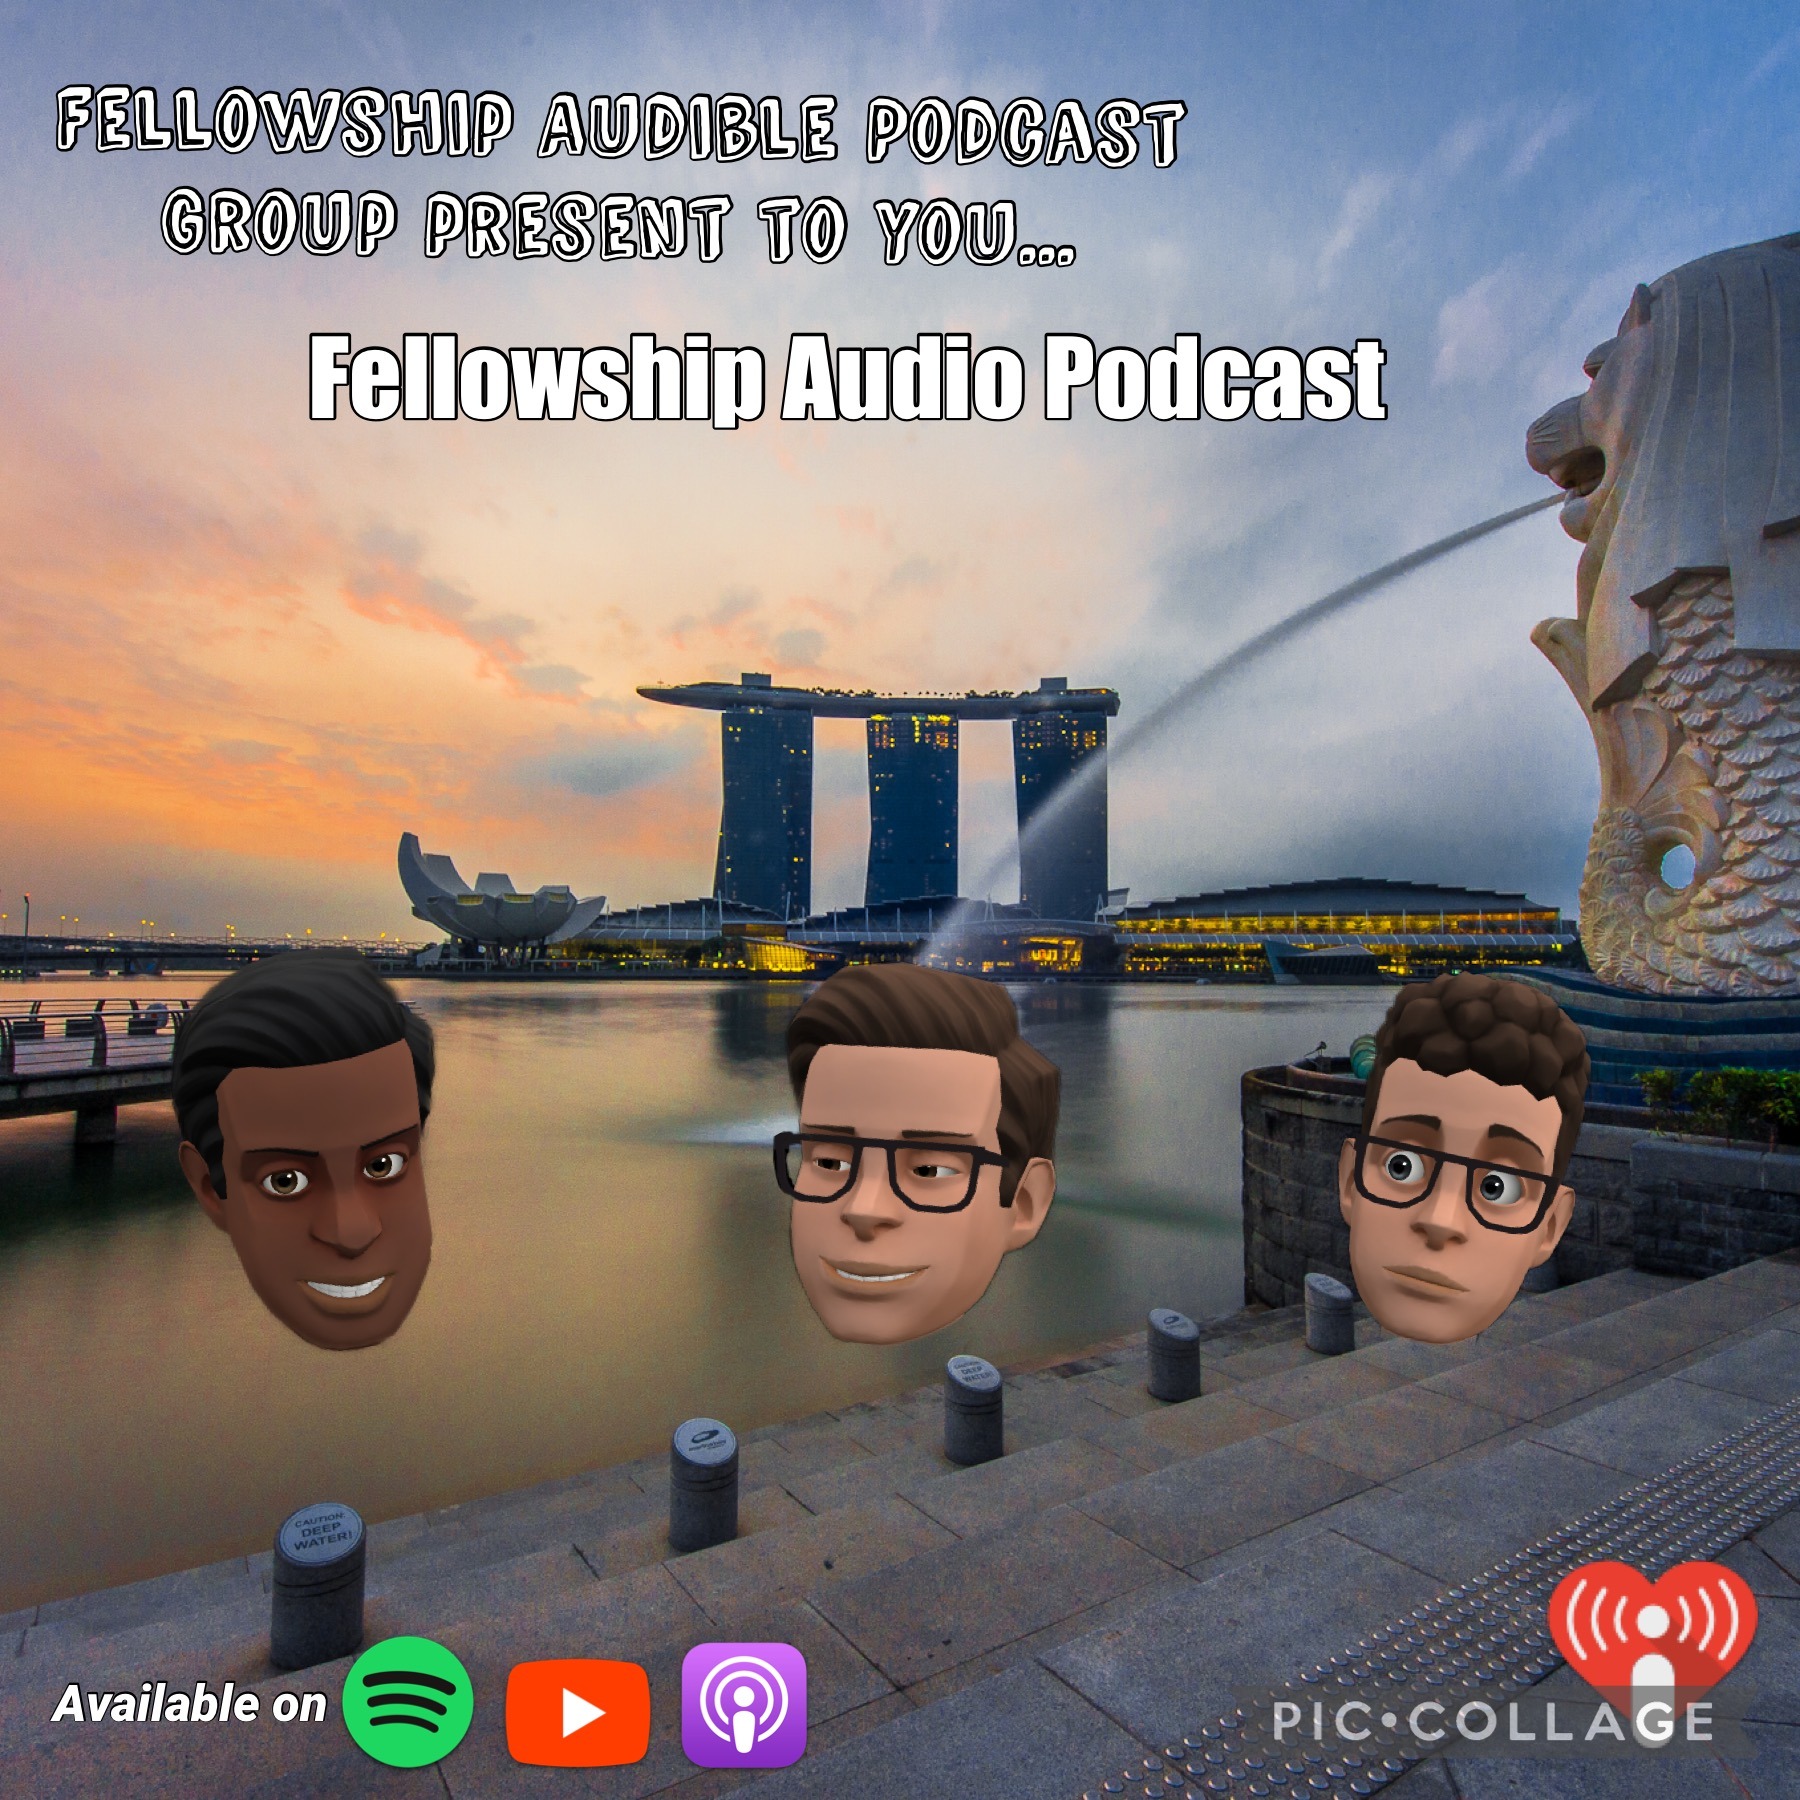 Covid-19 Update 9 Oct 2021 | Fellowship Audio Podcast